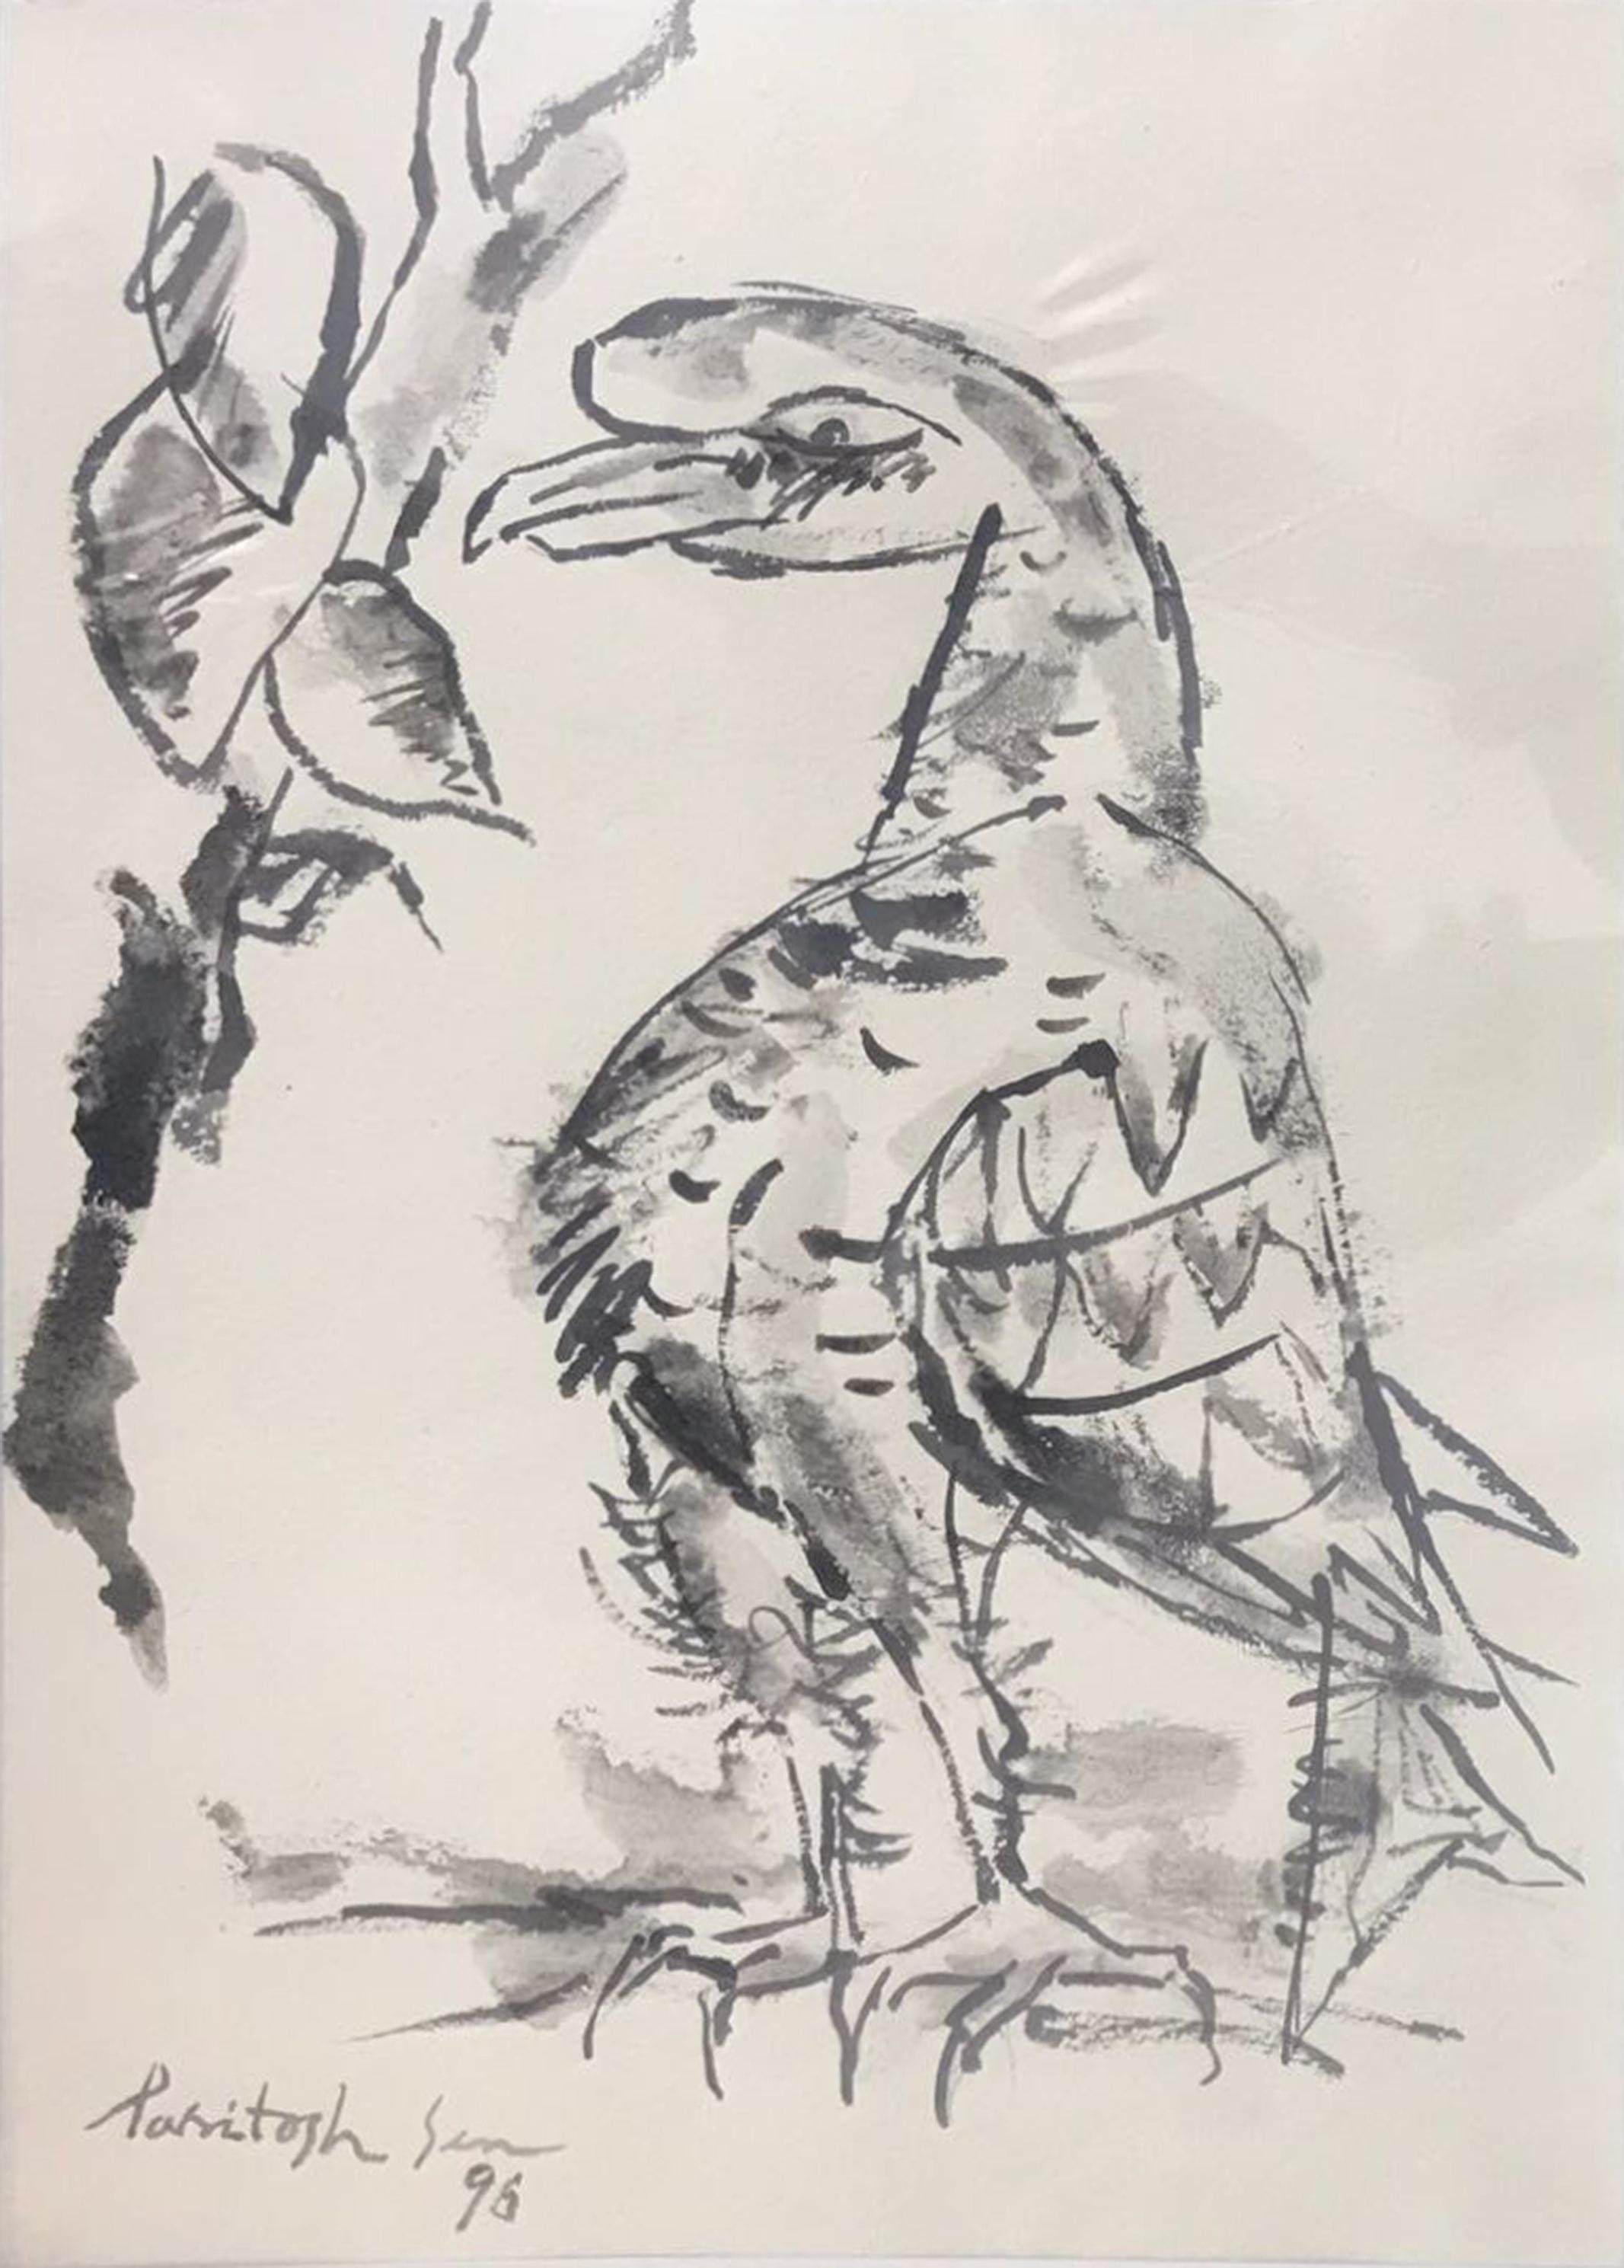 Paritosh Sen Animal Painting - Bird, Drawing, Charcoal on paper, Black, White By Master Indian Artist"In Stock"